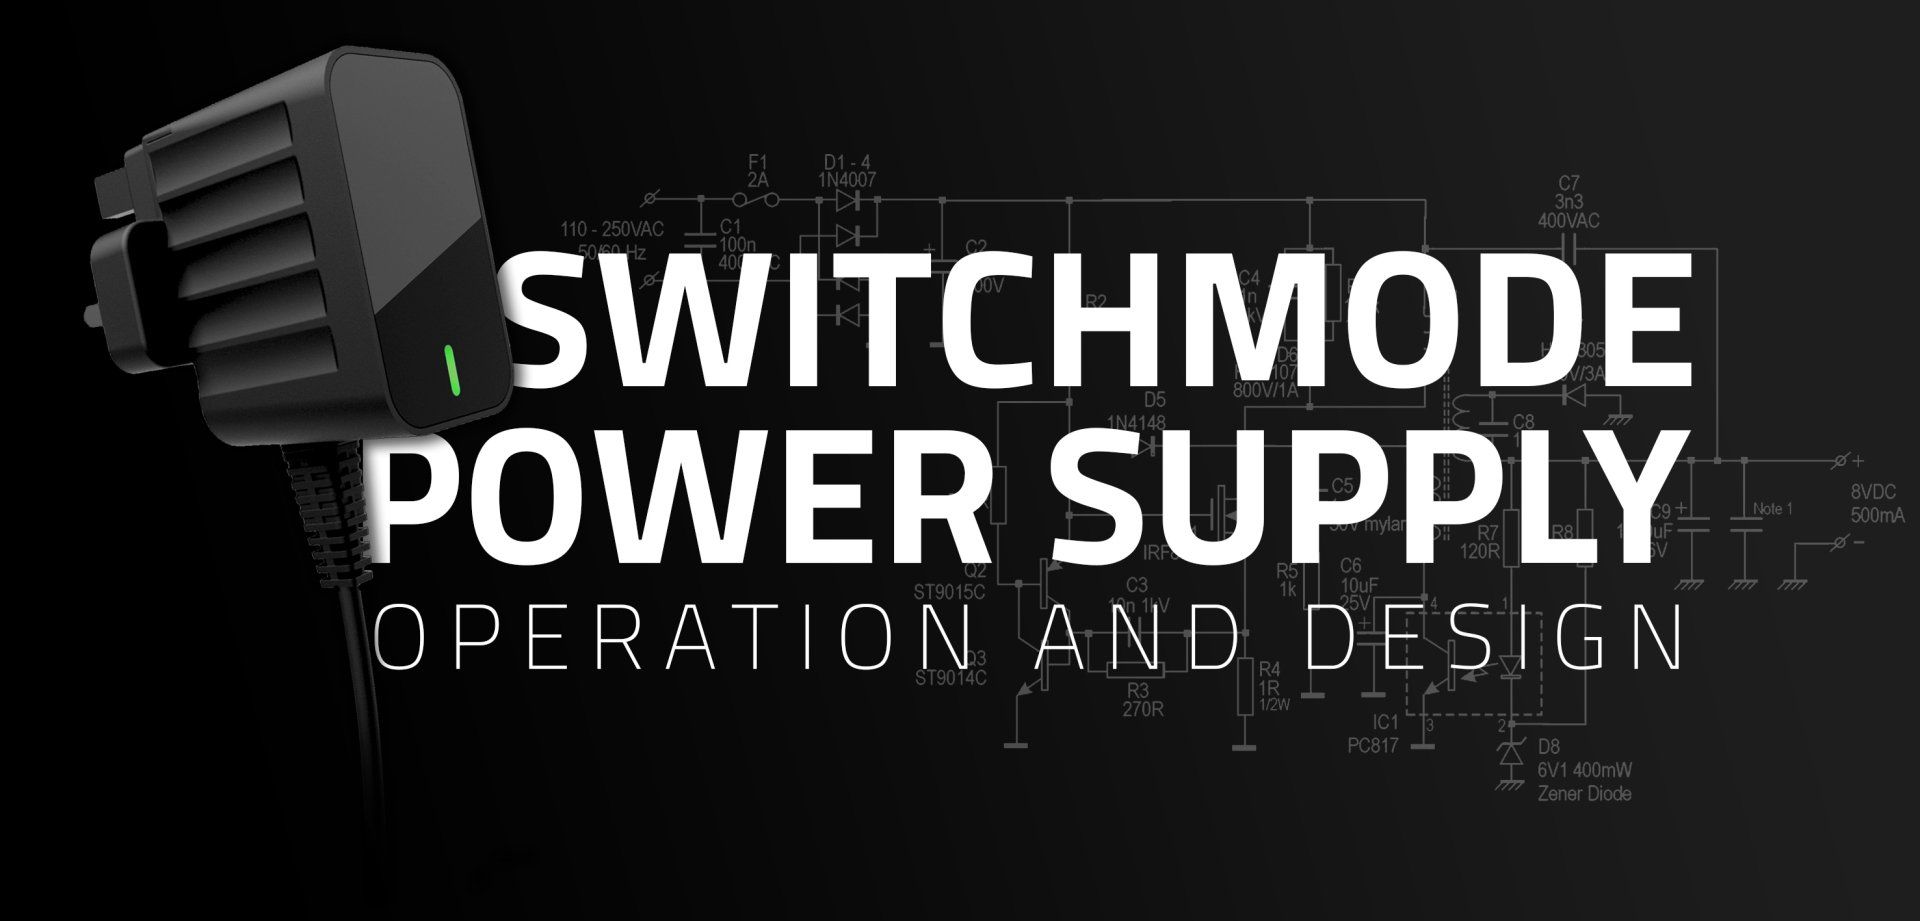 Switchmode Power Supplies vs Linear Power Supplies